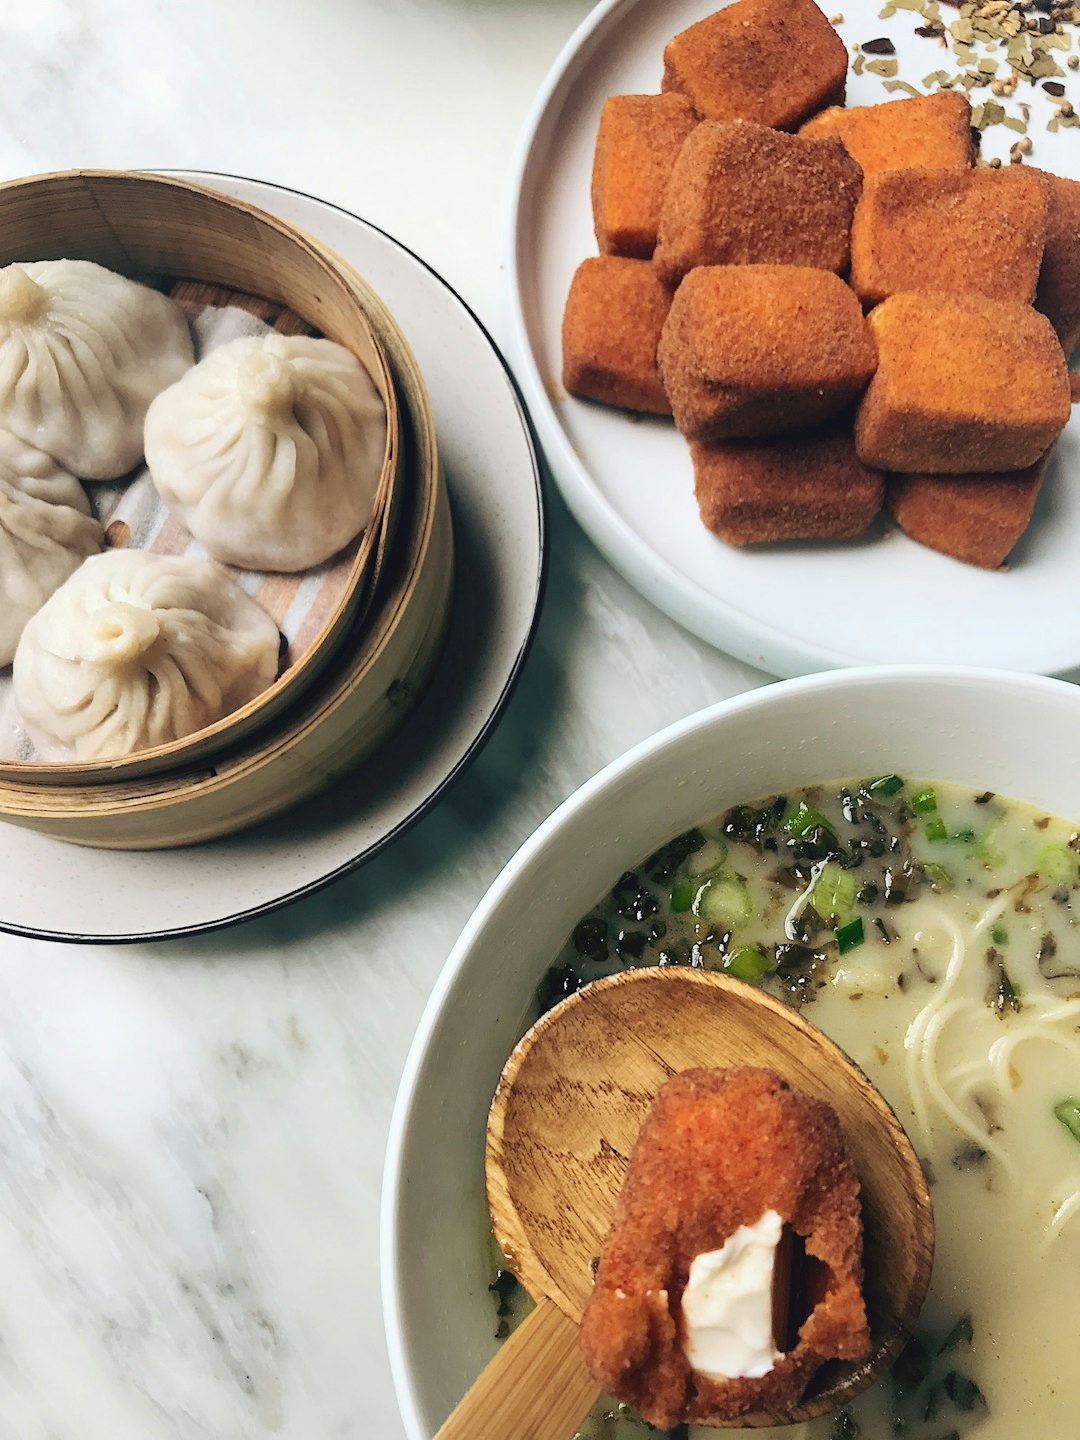 Chinese food in NYC

Photo by Cloris on Unsplash